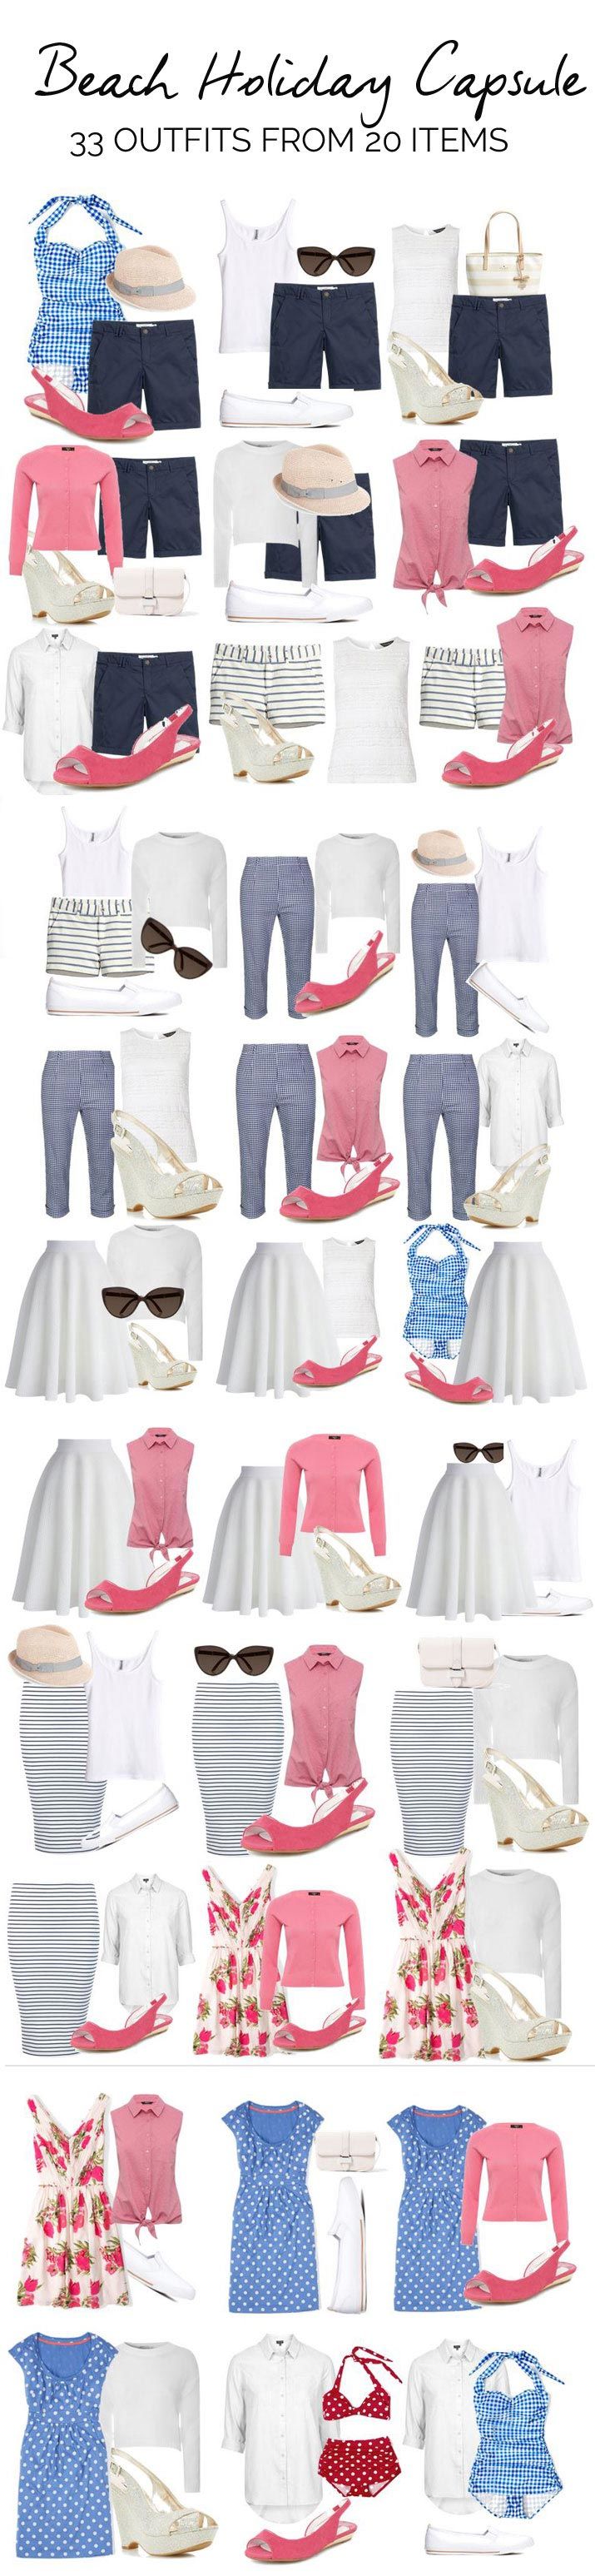 beach holiday capsule wardrobe: what to pack for a beach vacation